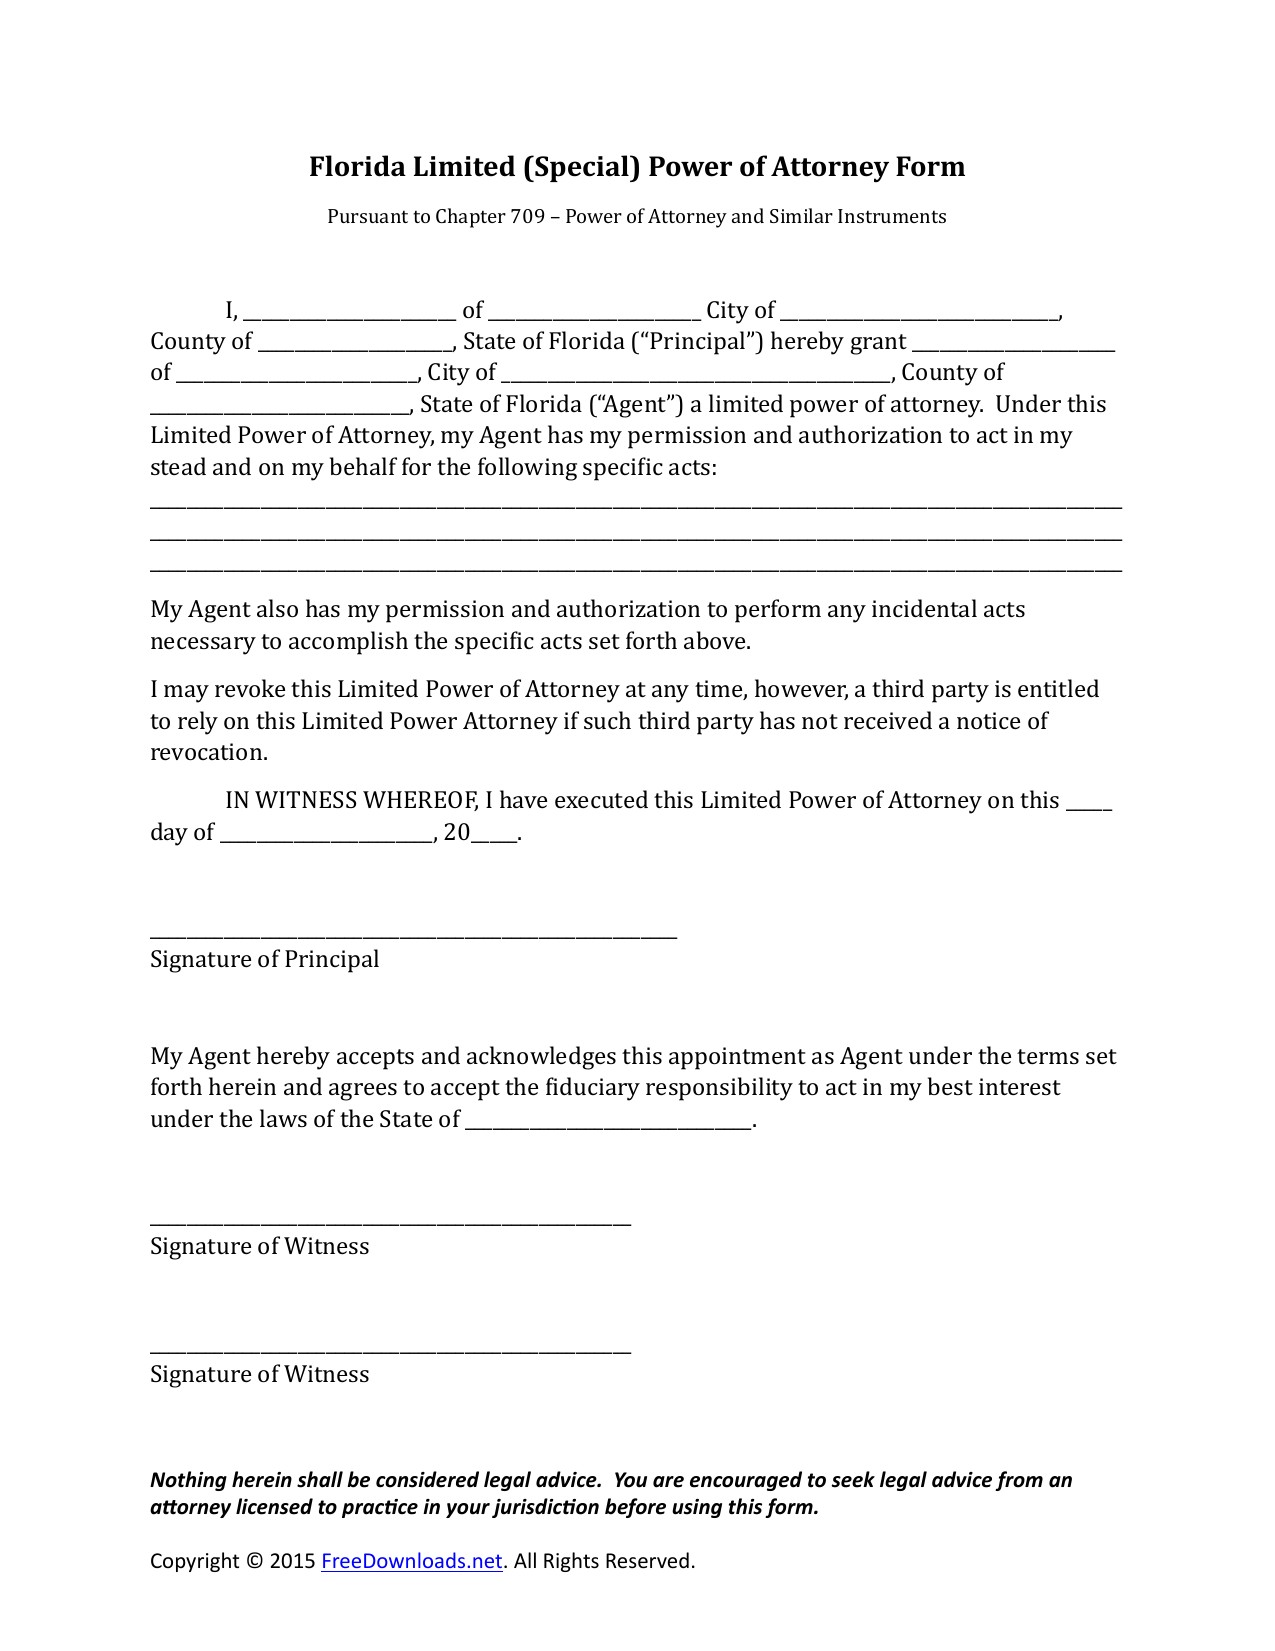 Download Florida Special Limited Power Of Attorney Form PDF Document Free